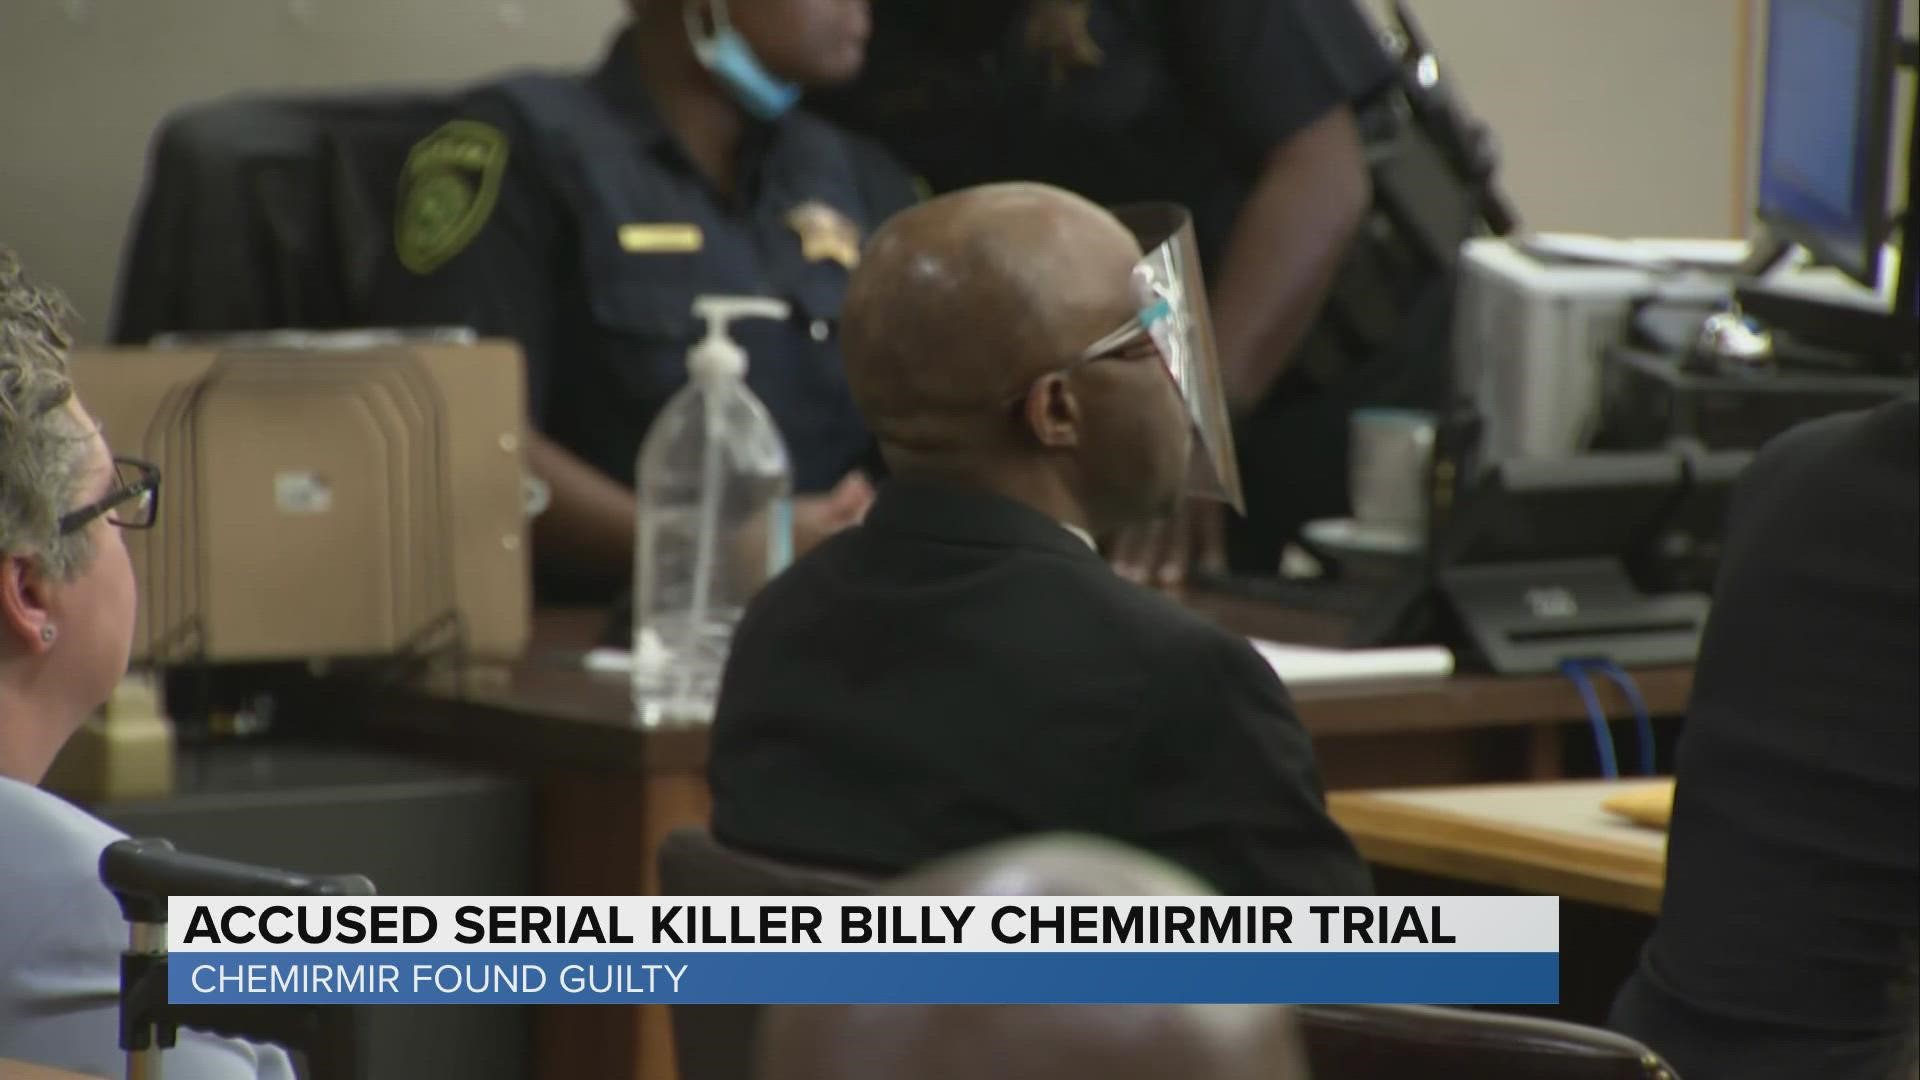 Billy Chemirmir was found guilty of capital murder and sentenced to life without the possibility of parole.